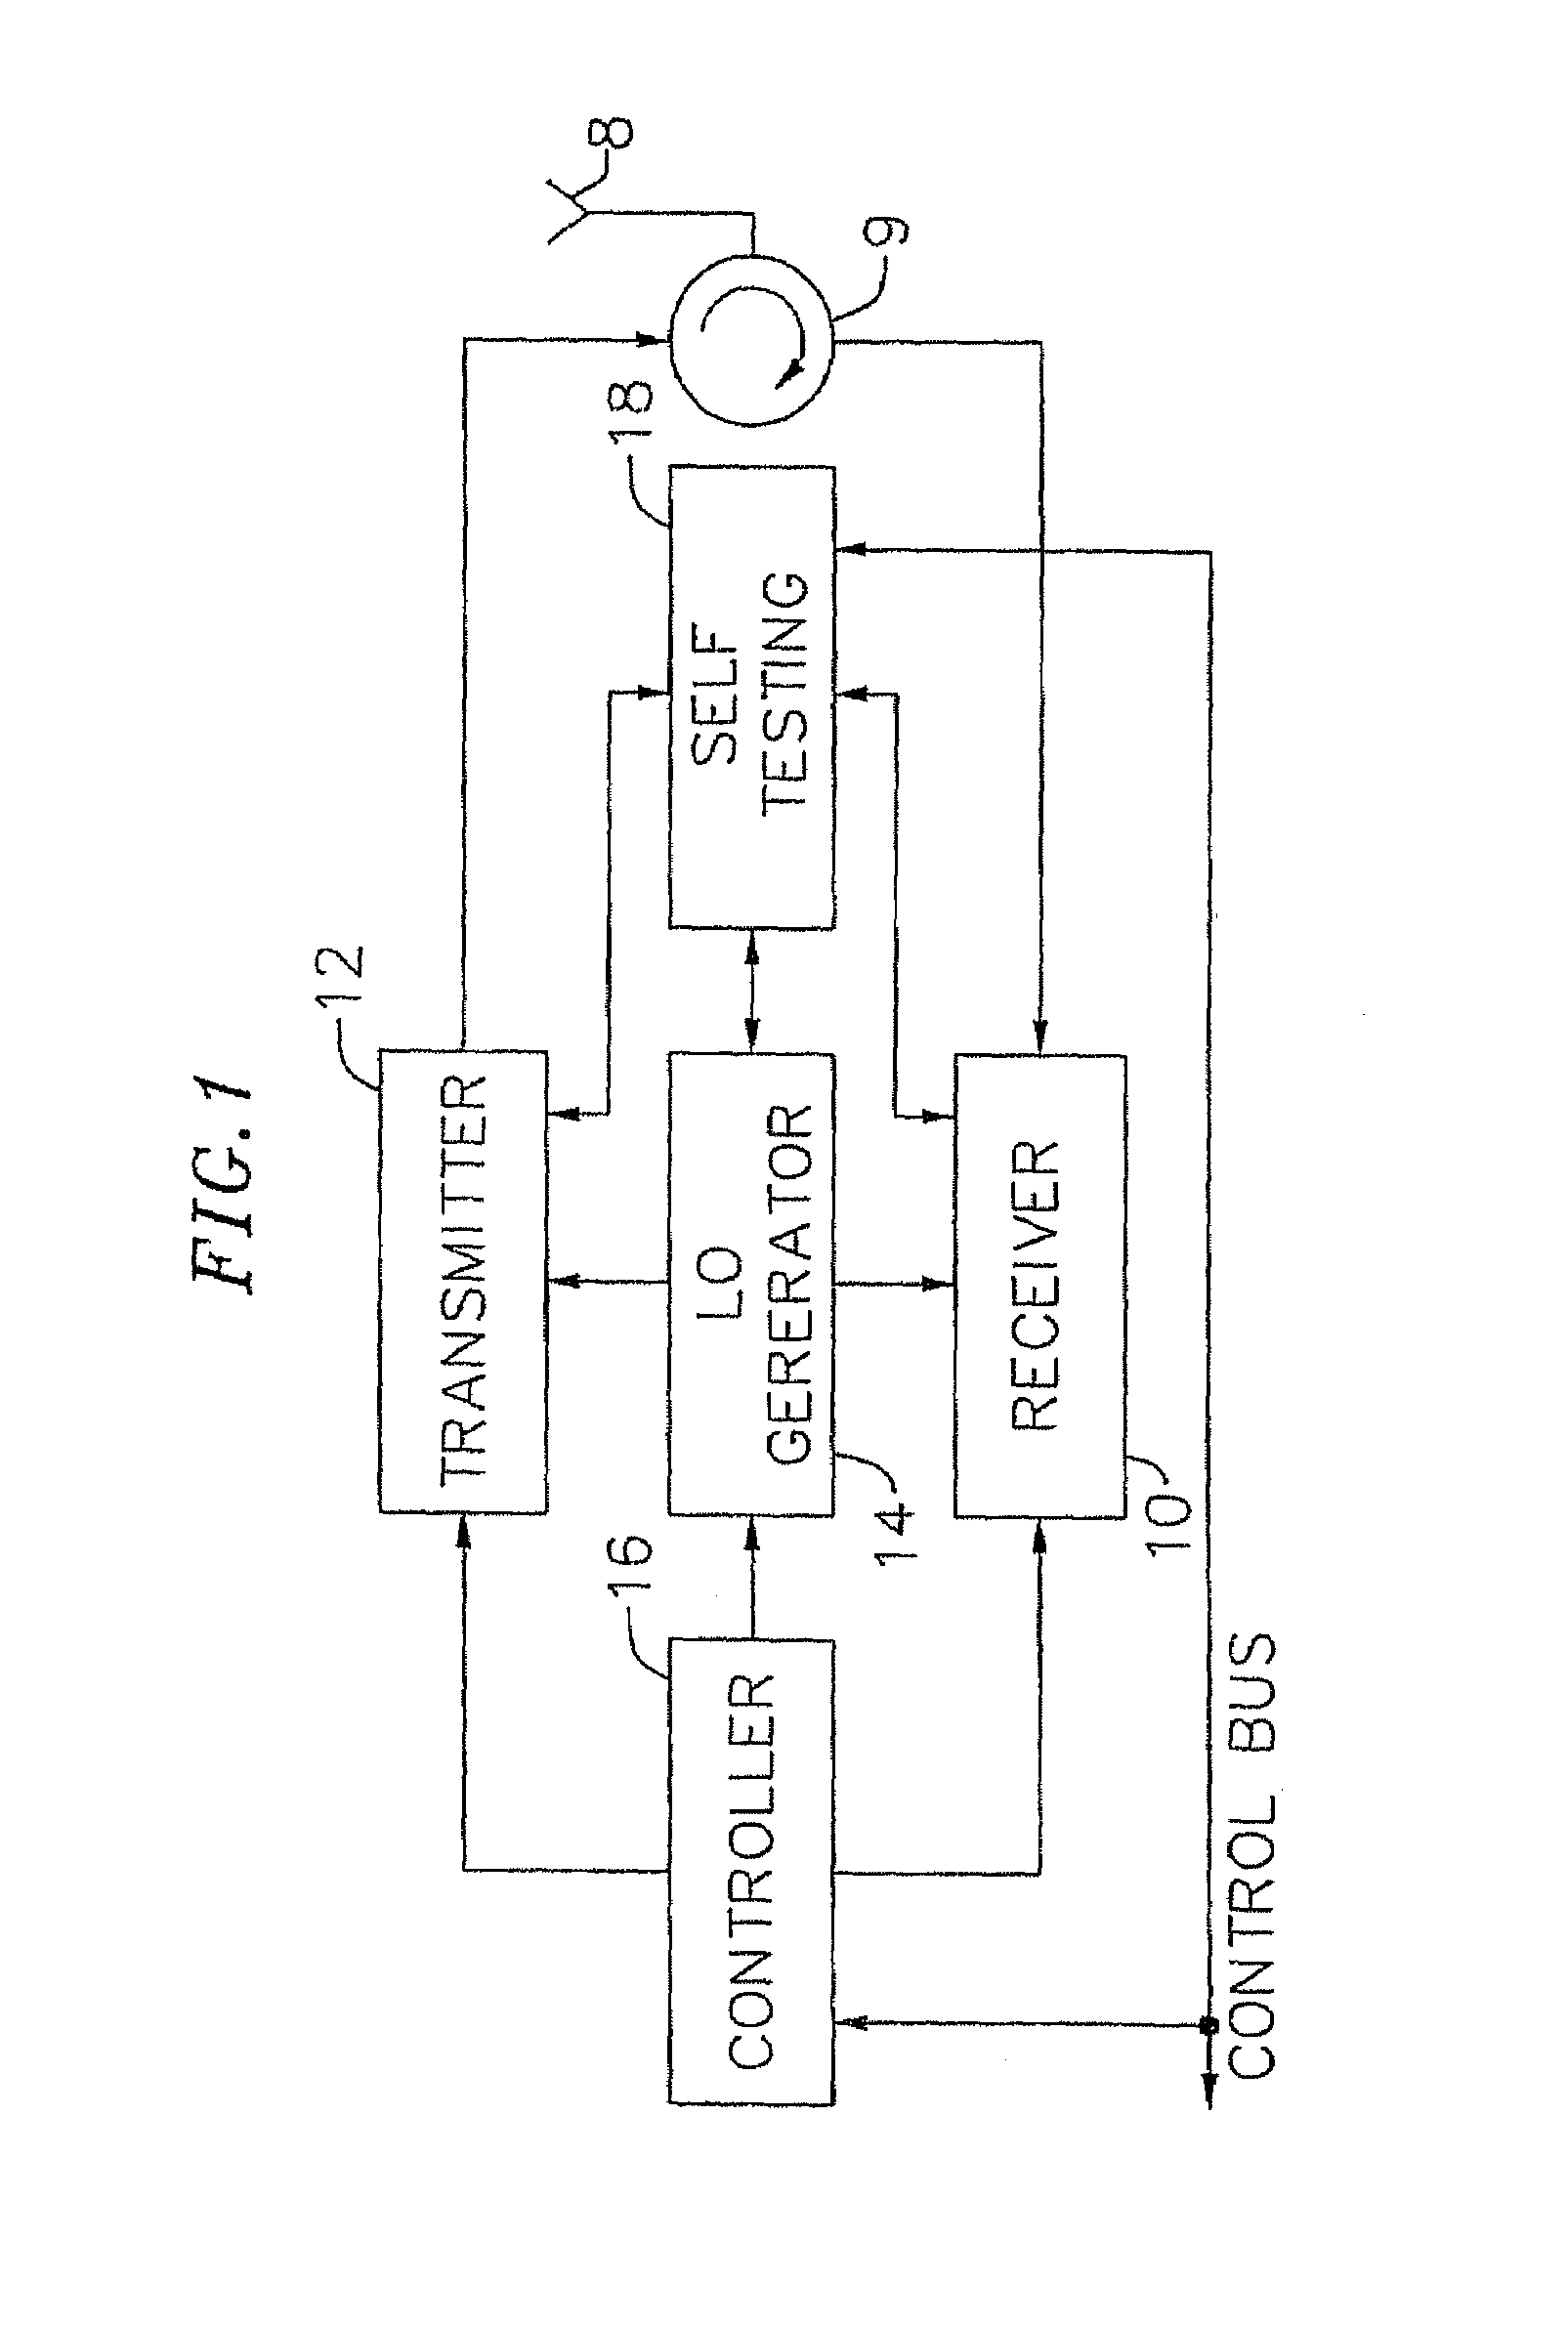 Adaptive radio transceiver with subsampling mixers